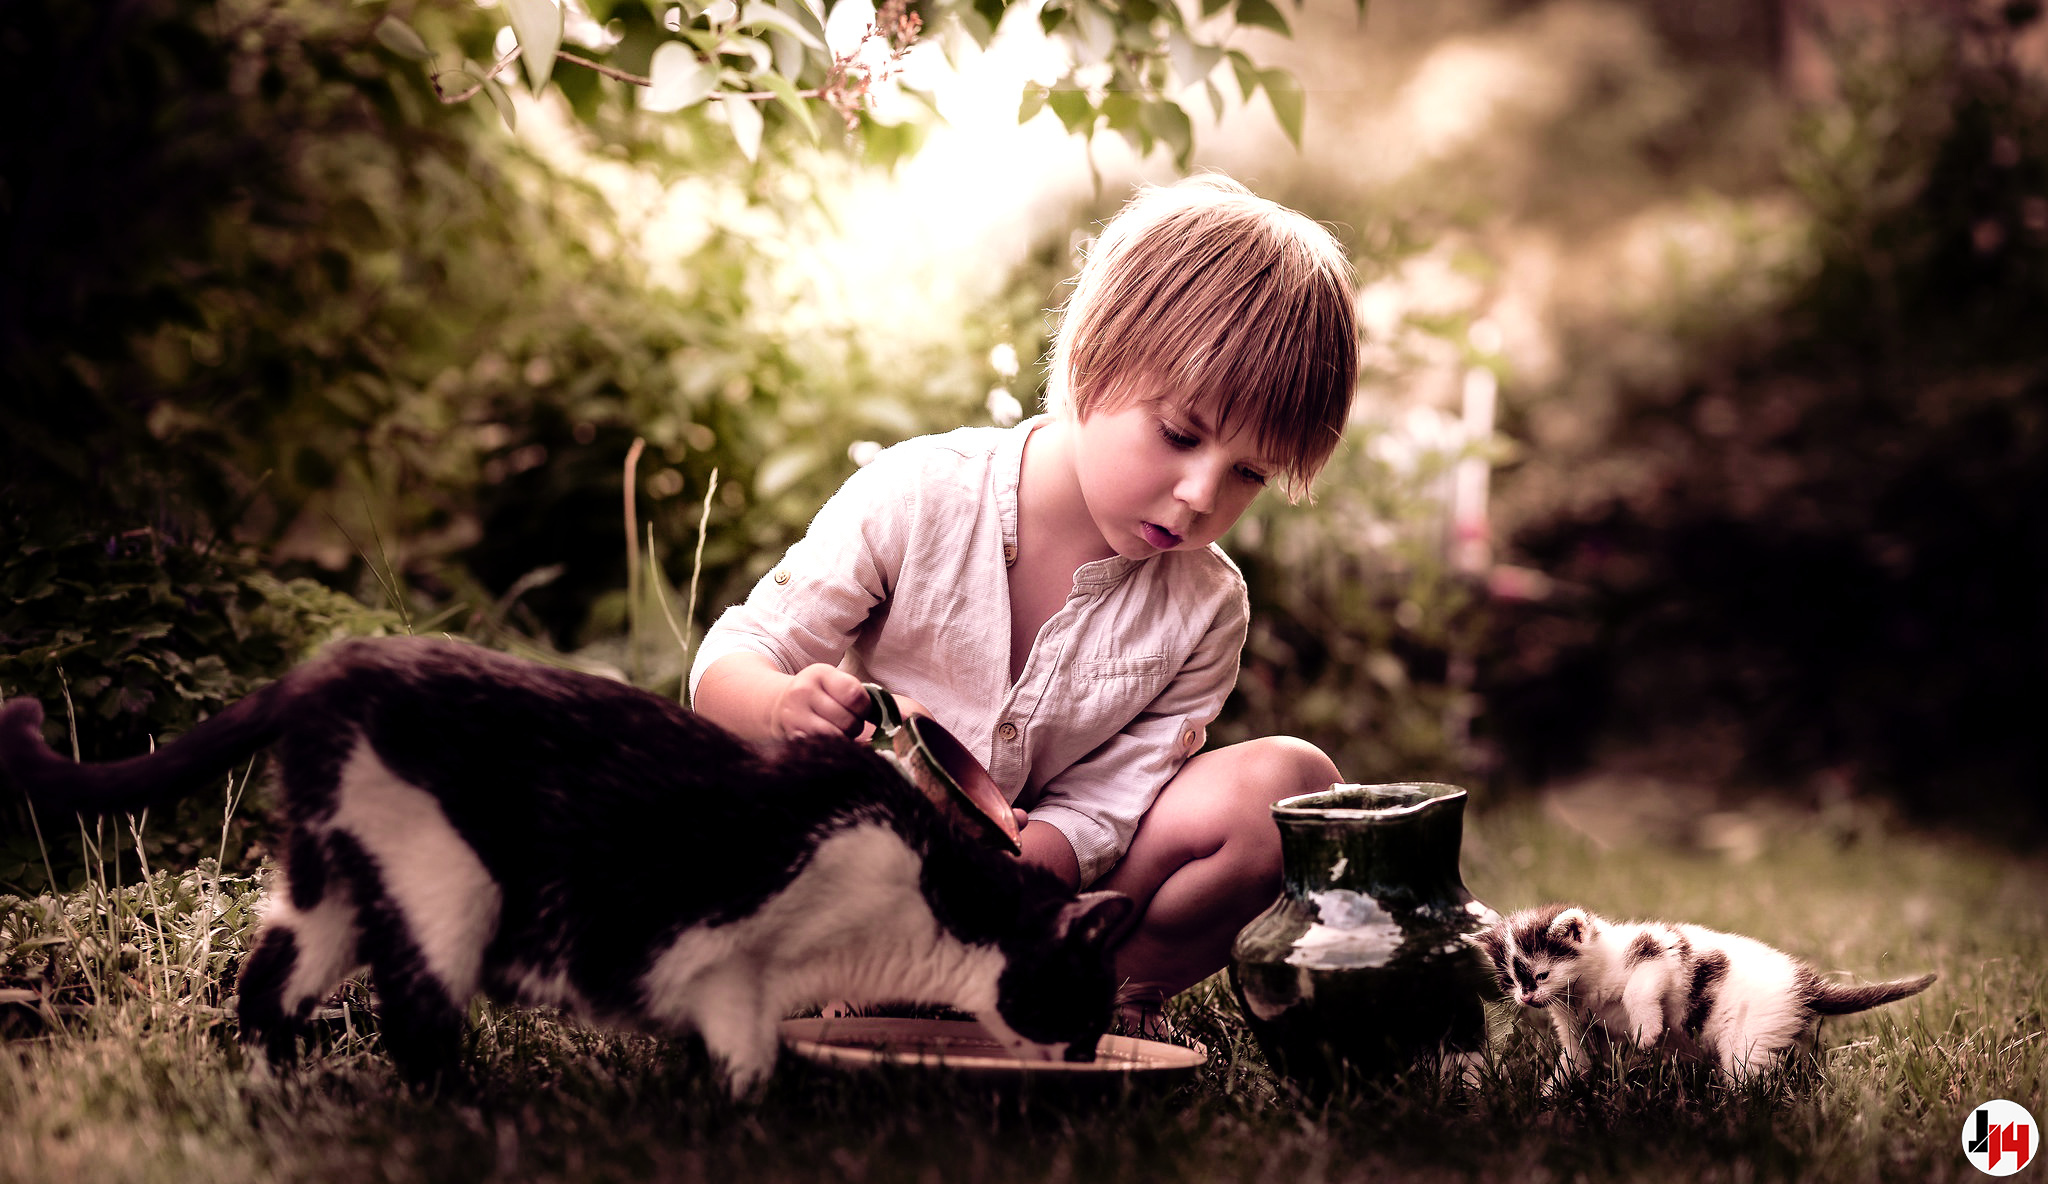 A boy feeds a cat with kittens with milk